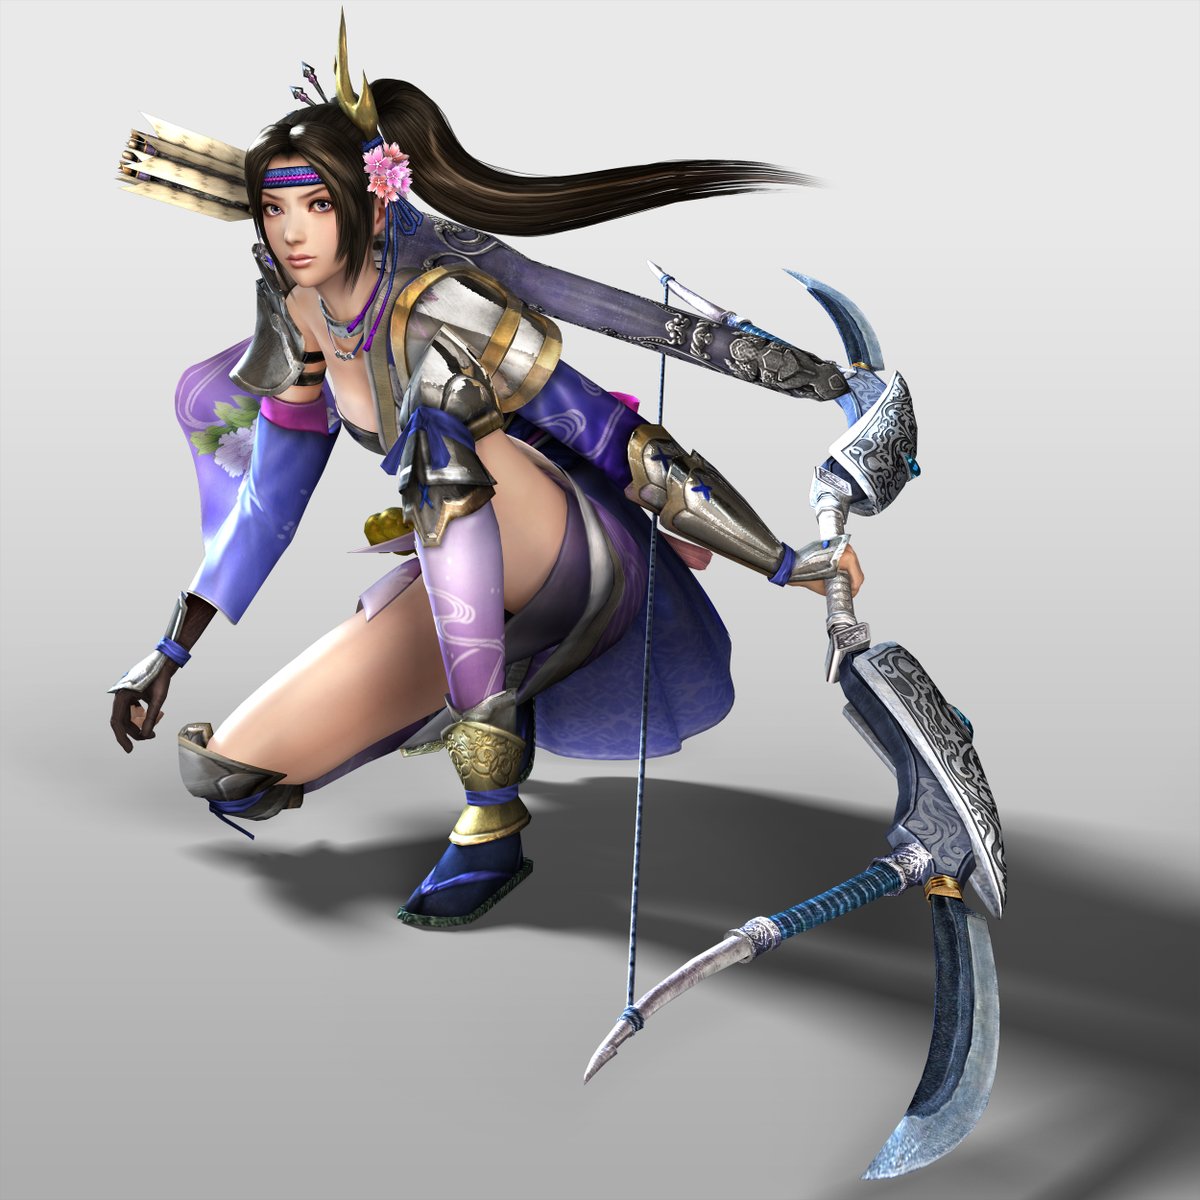 InaTadakatsu's daughter, strong and righteous with a strong sense of justice. Does NOT take shit from horny men. Love that for her!